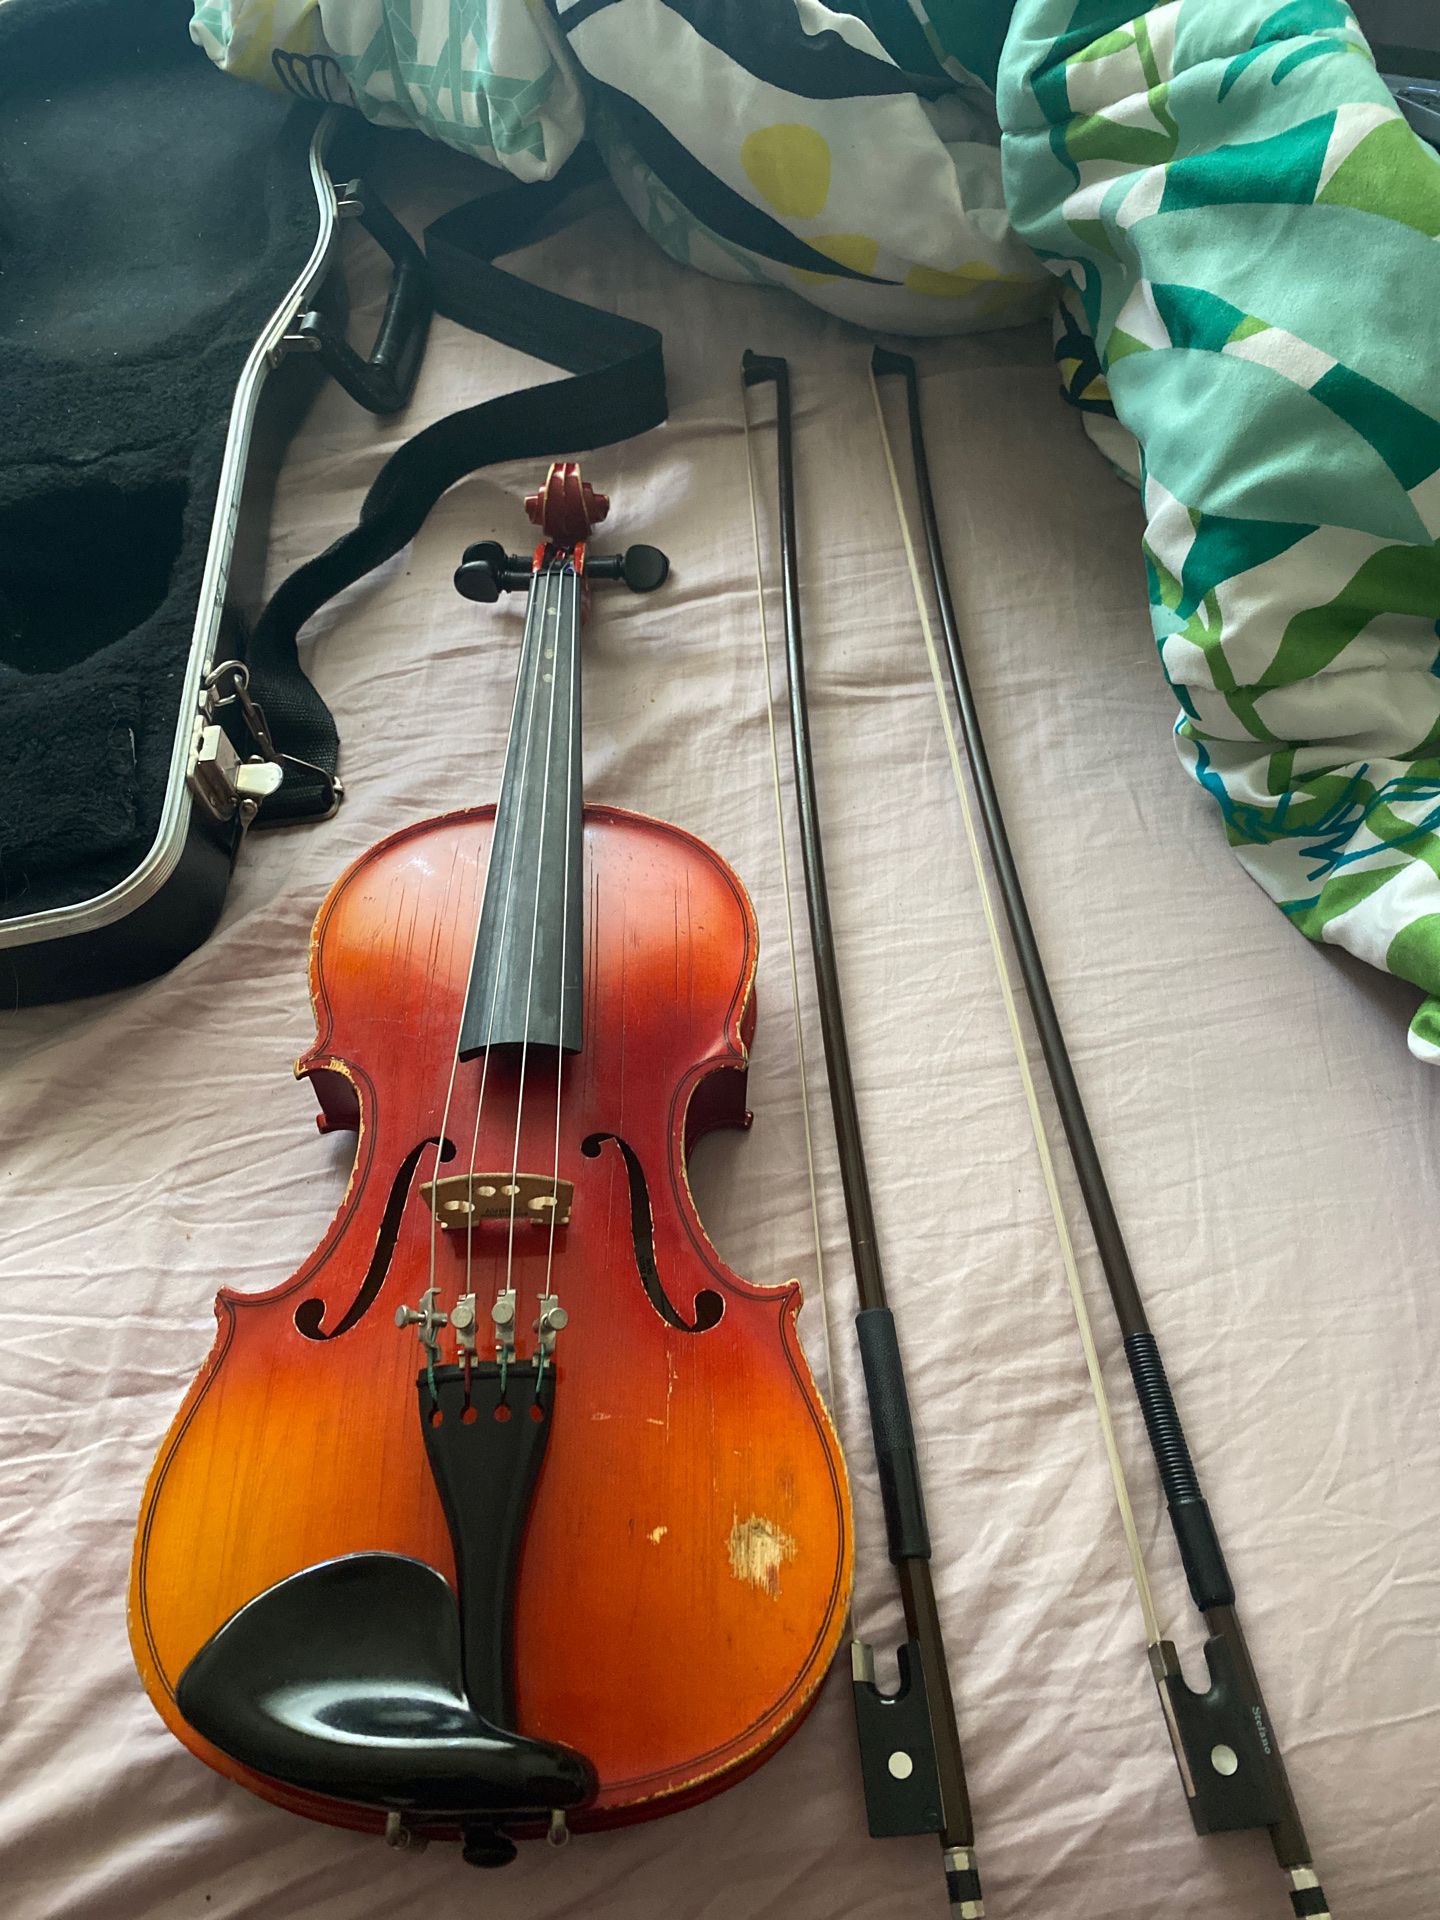 Violin with a good case